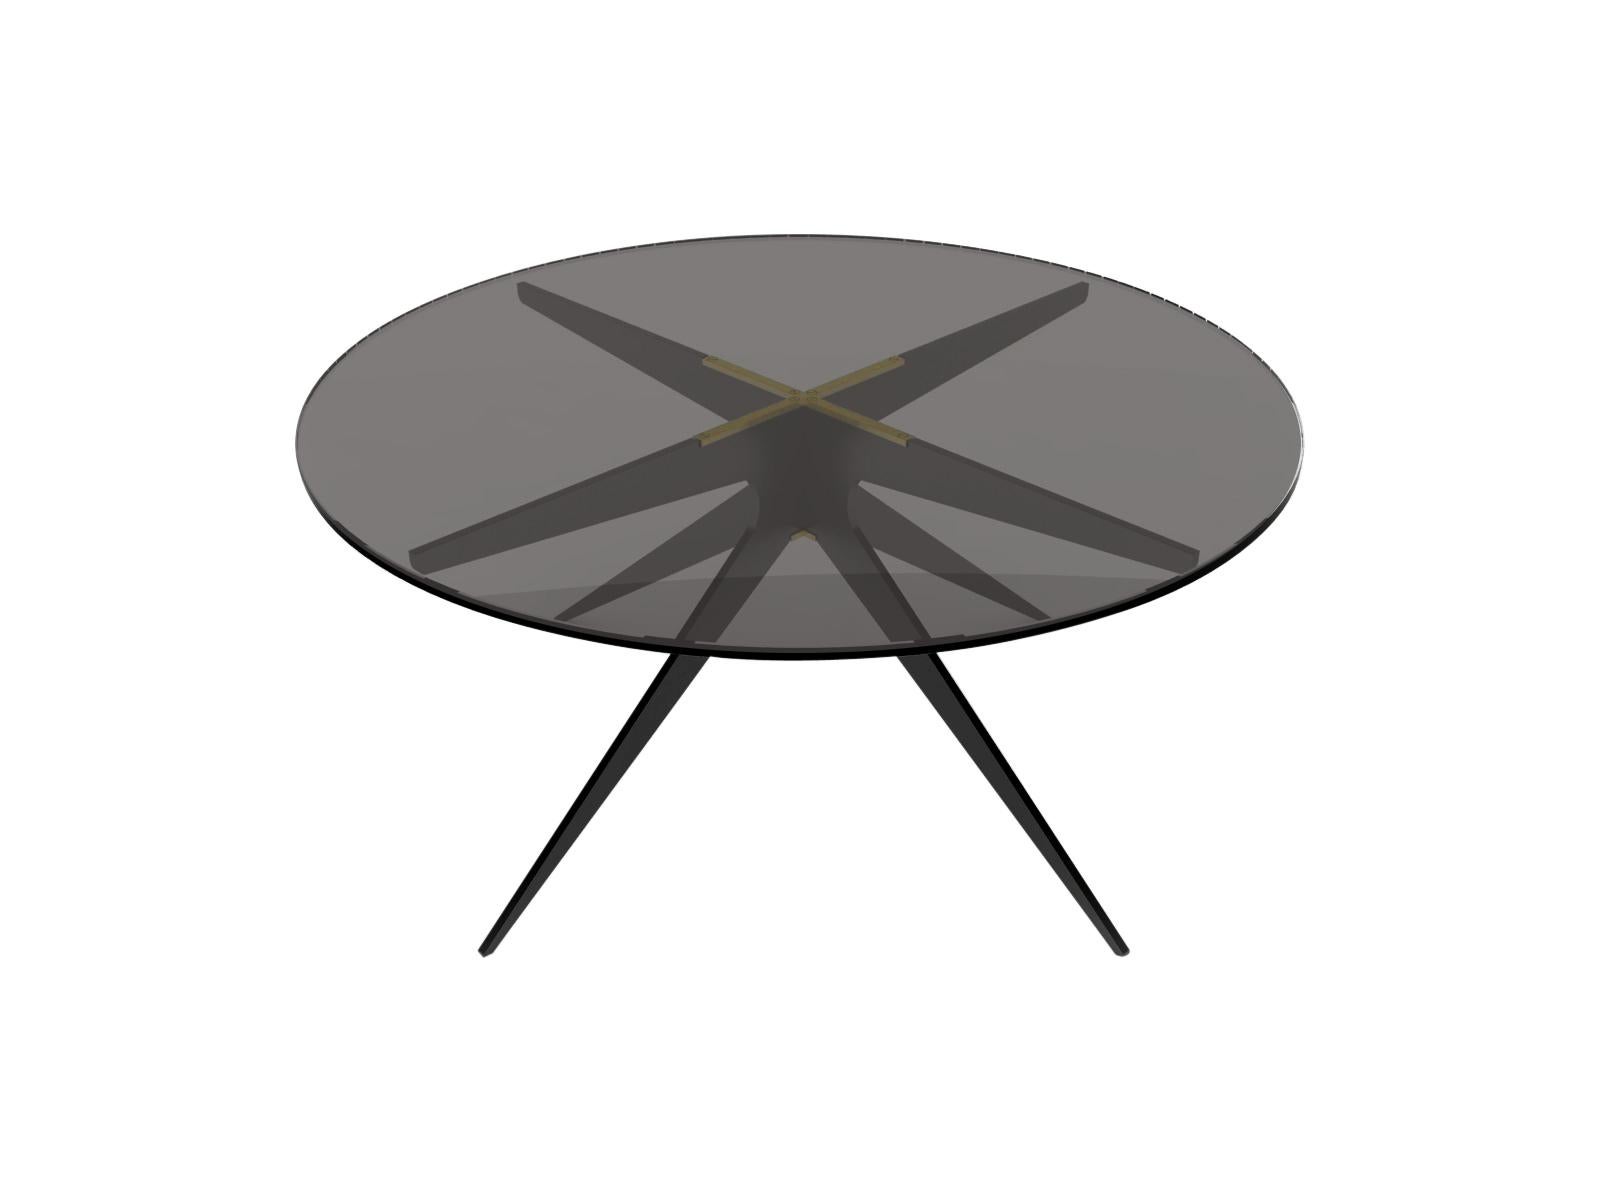 Gray (Smoked Glass) Dean Round Coffee Table in Blackened Steel Base with Glass Top by Gabriel Scott